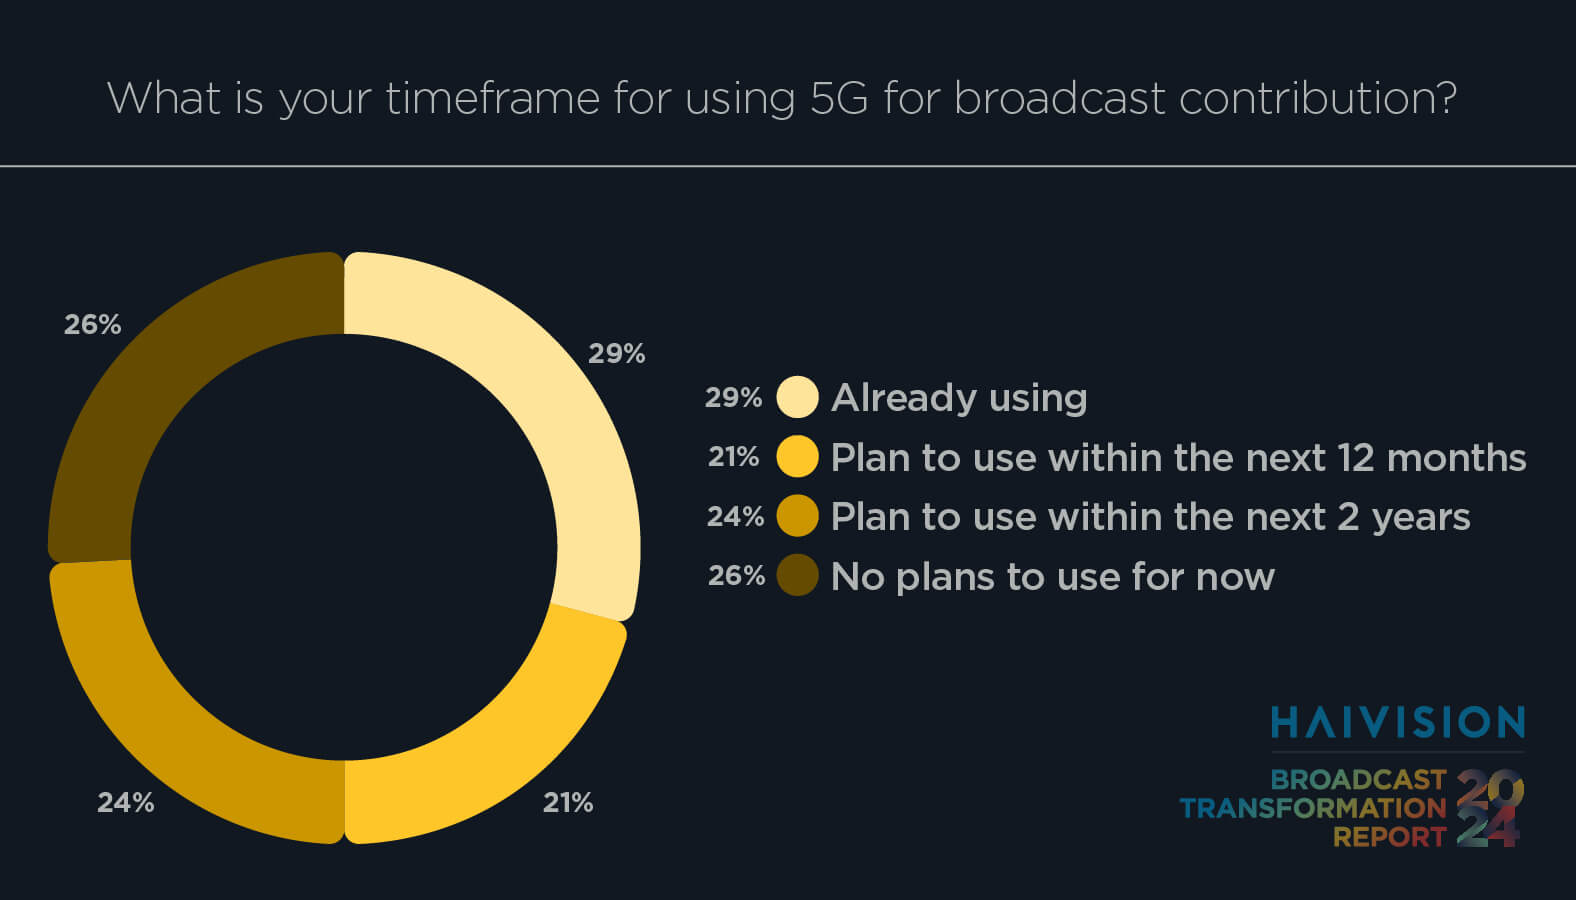 What is your timeframe for using 5G for broadcast contribution?